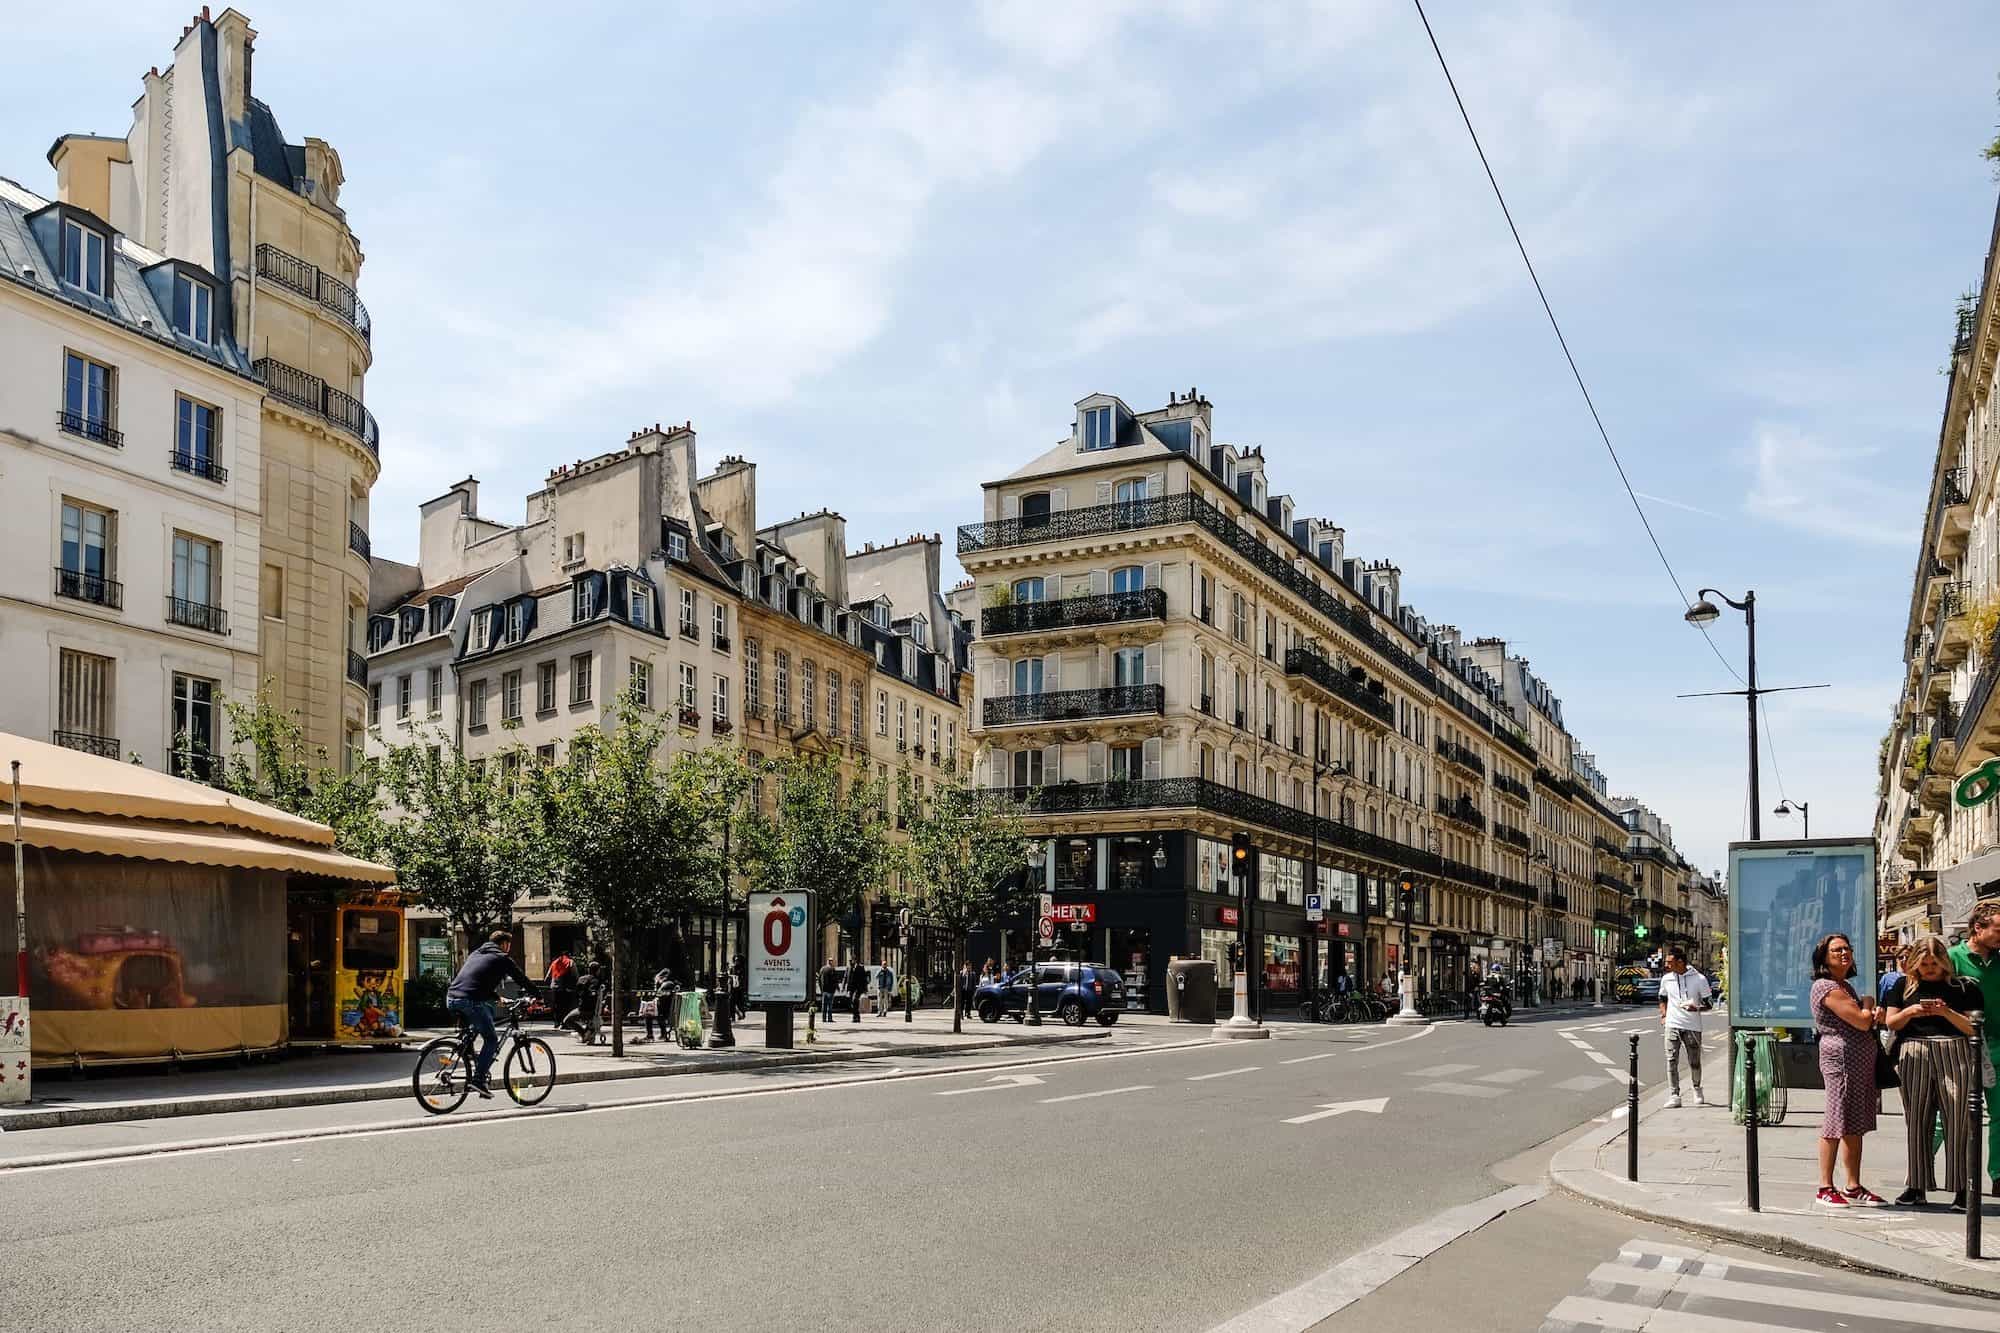 Sundays in Paris: What to do on a Sunday in the Marais